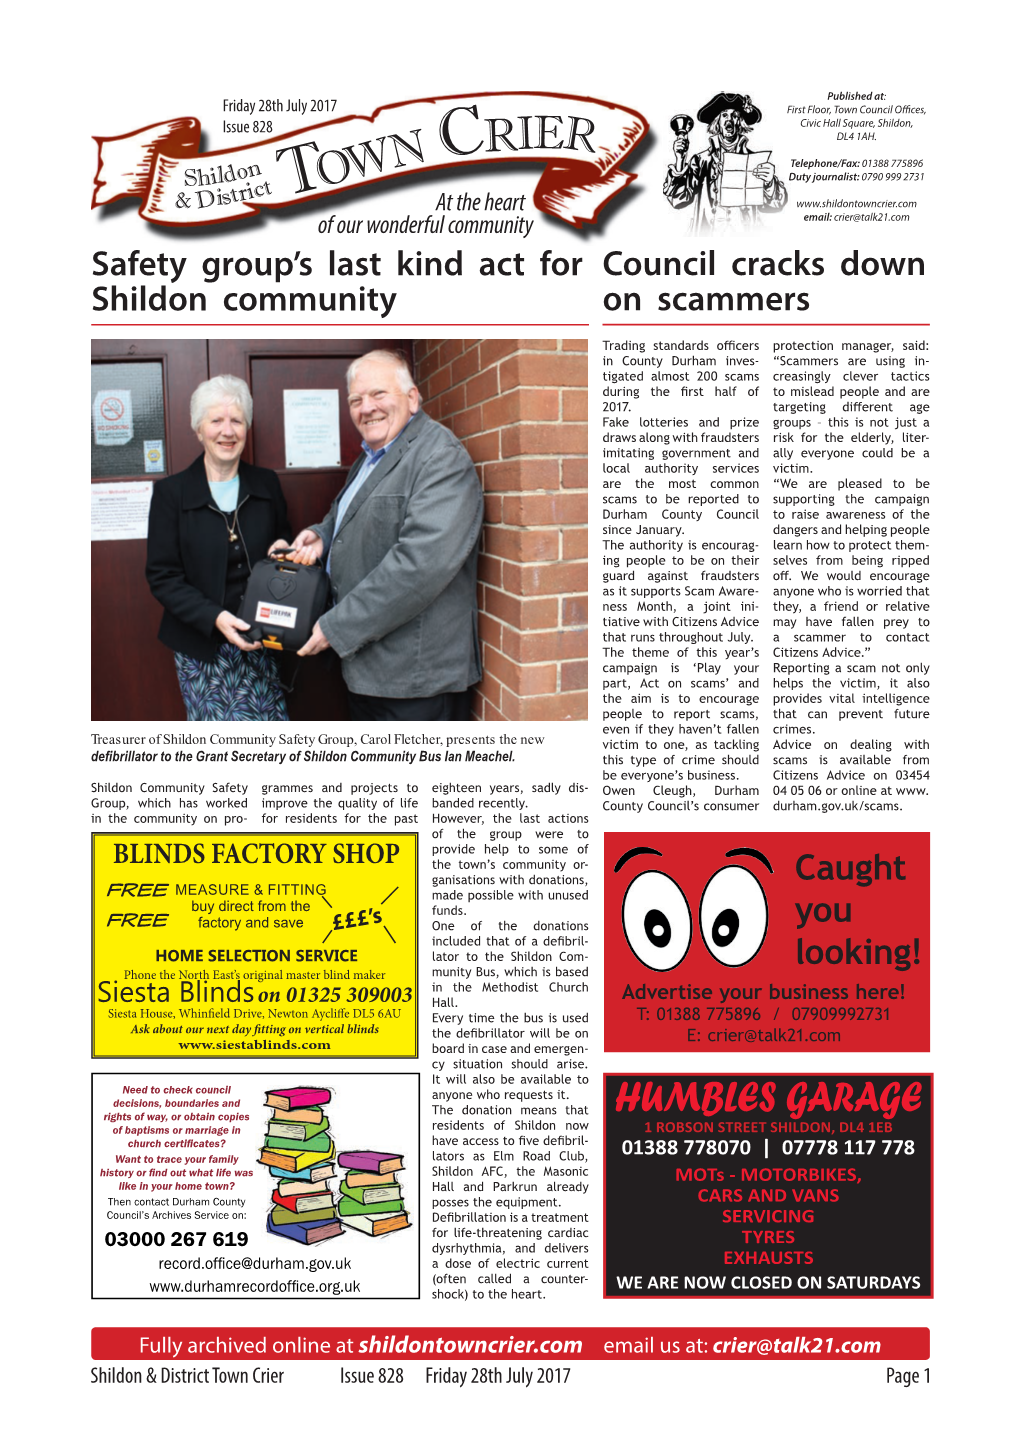 Town Crier Issue 828 Friday 28Th July 2017 Page 1 N Crier Shildon W Ict O Classifieds & Dist R T